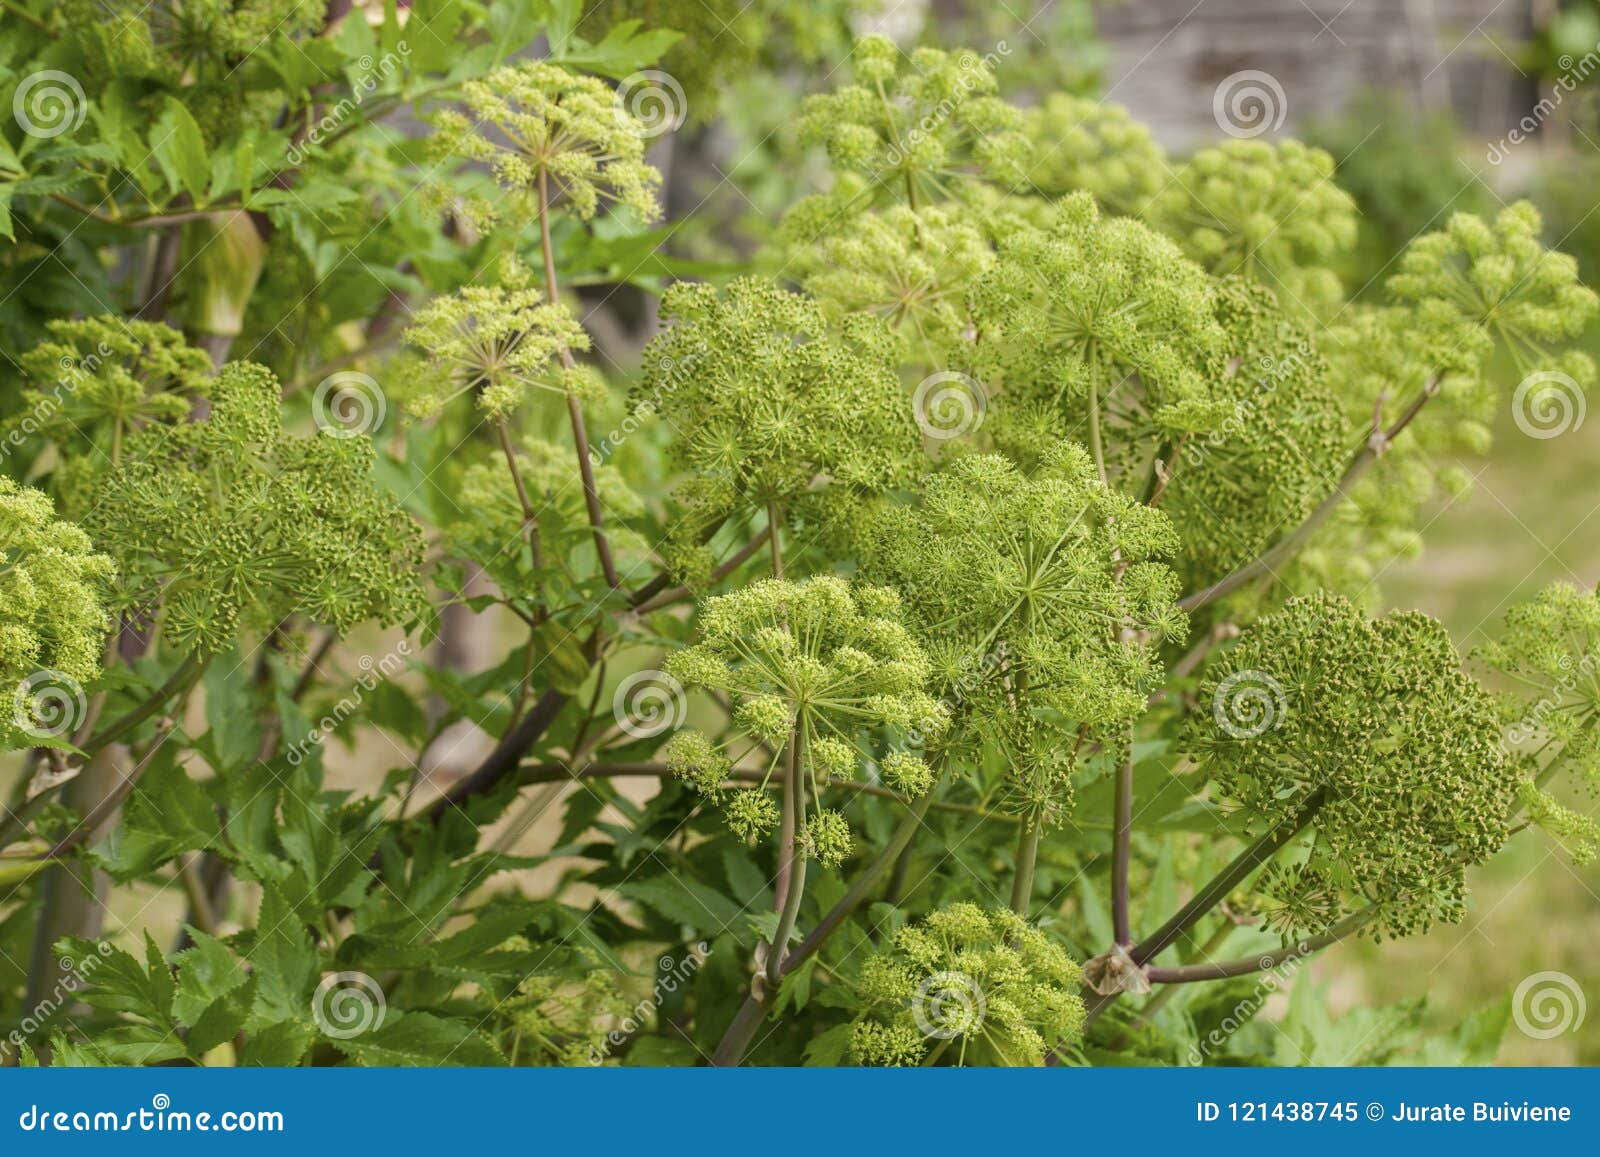 angelica archangelica - the plant used in culinary